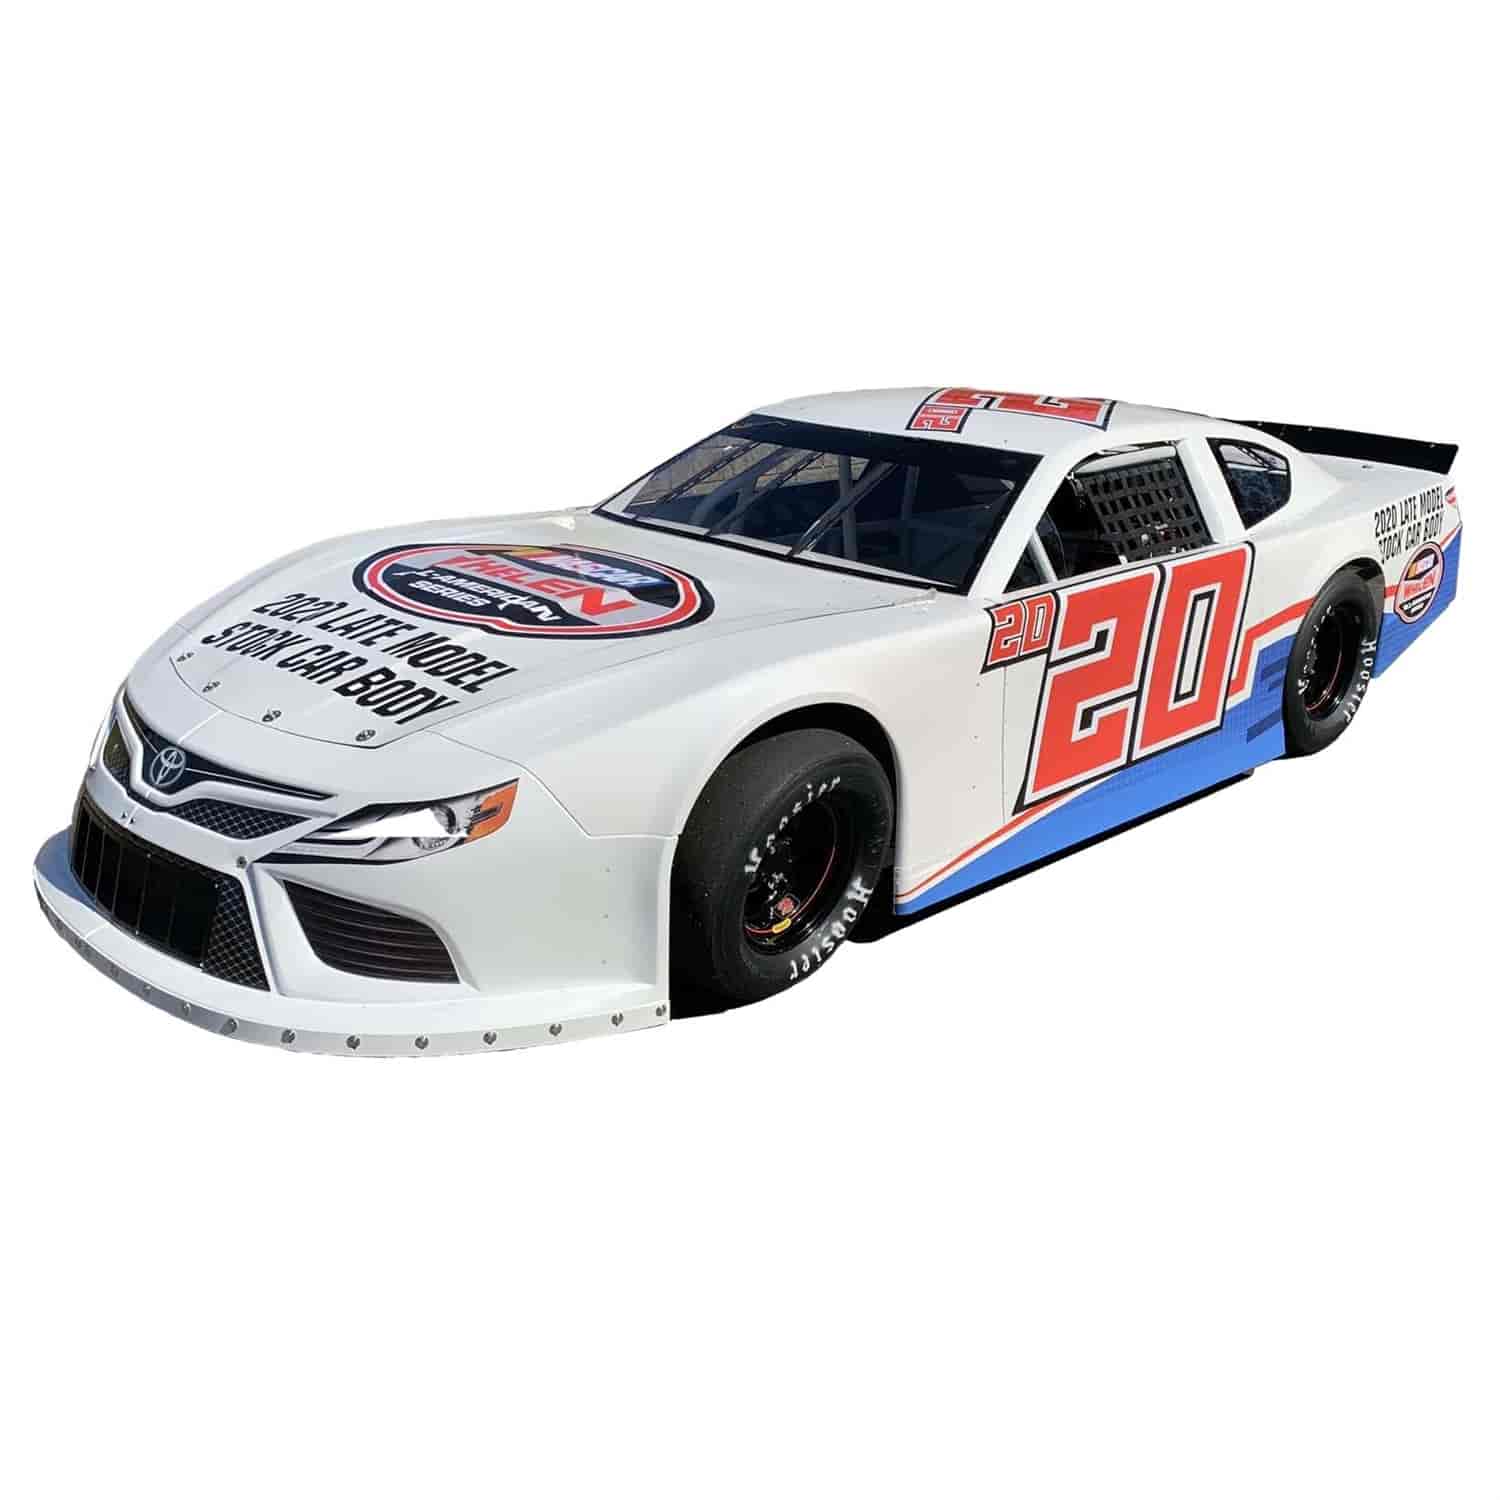 2020 LMSC Complete Body Package - Toyota Camry